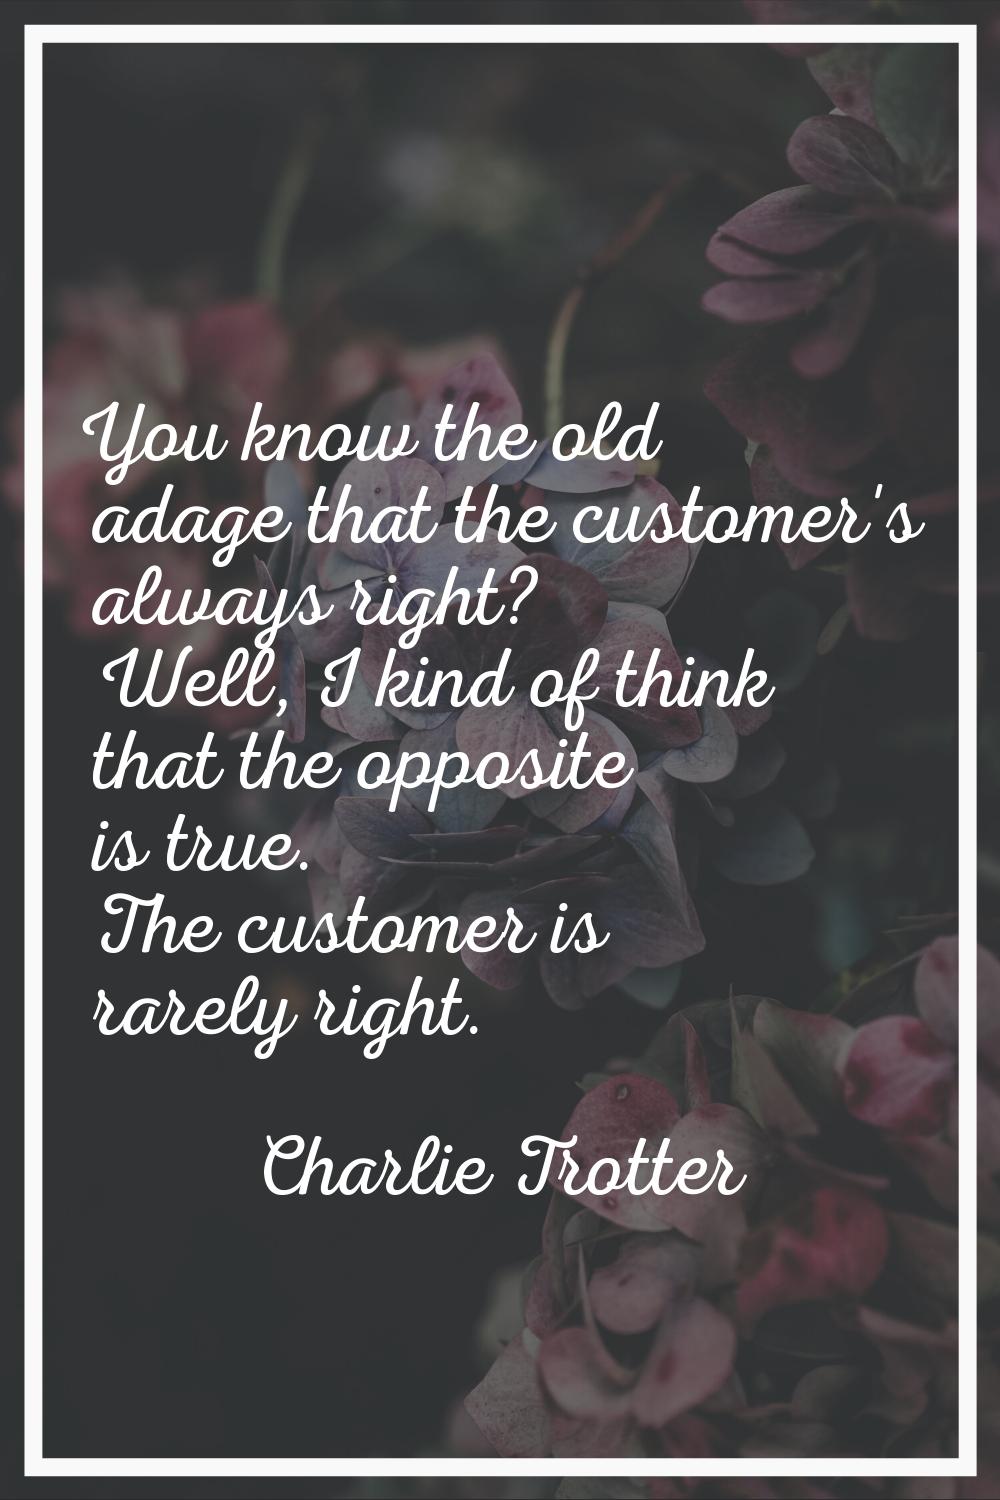 You know the old adage that the customer's always right? Well, I kind of think that the opposite is